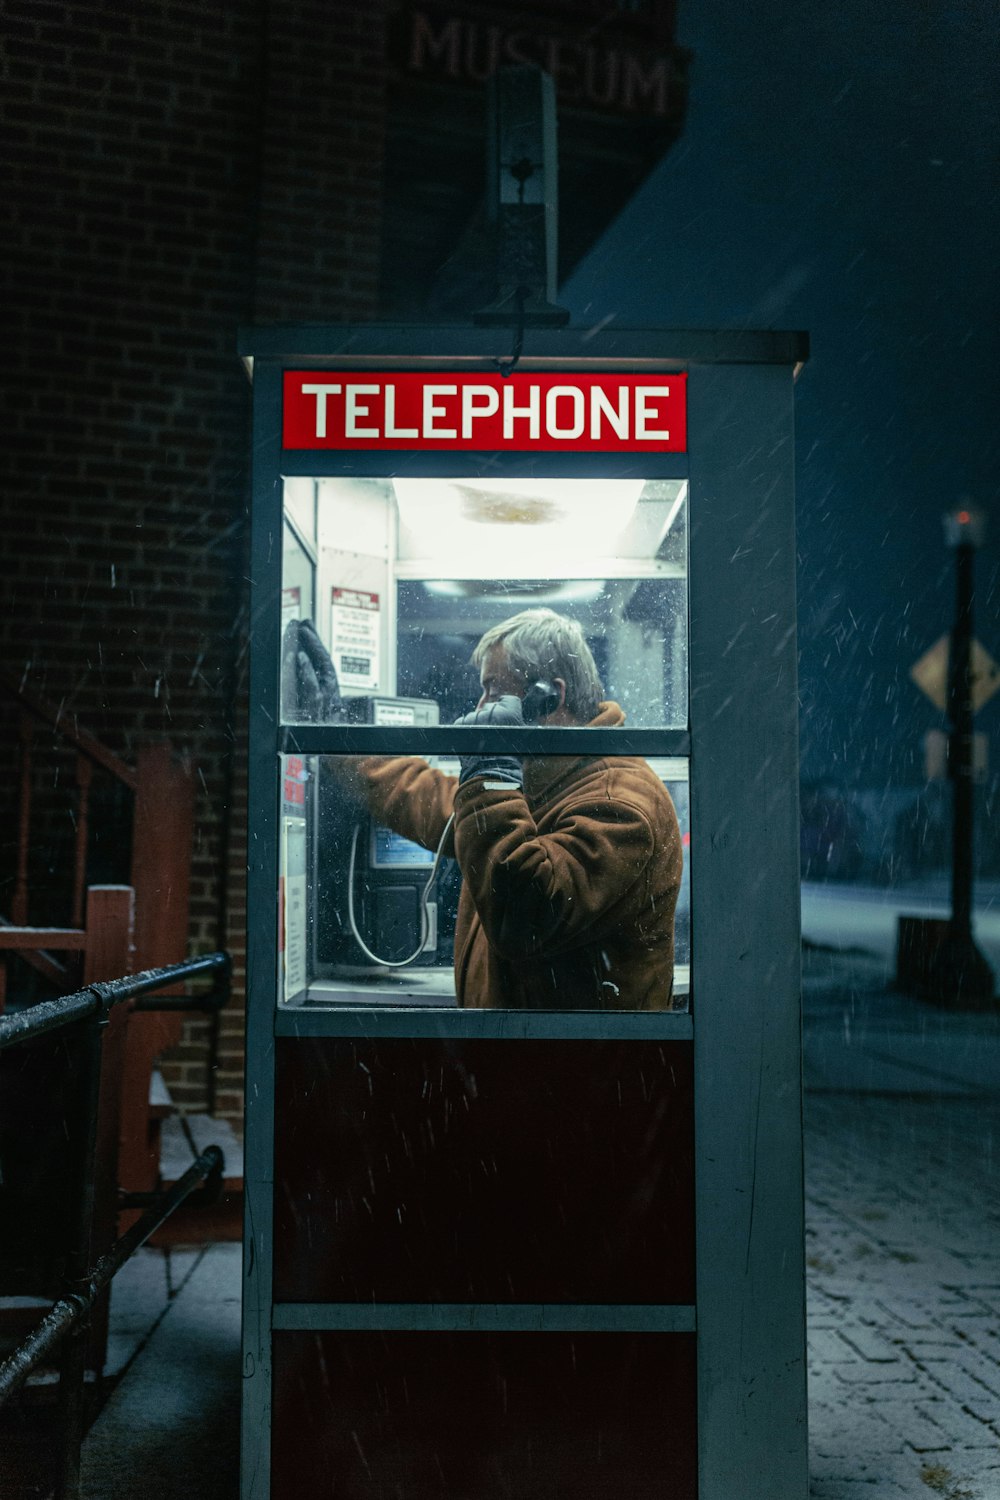 a man is using a telephone booth in the snow